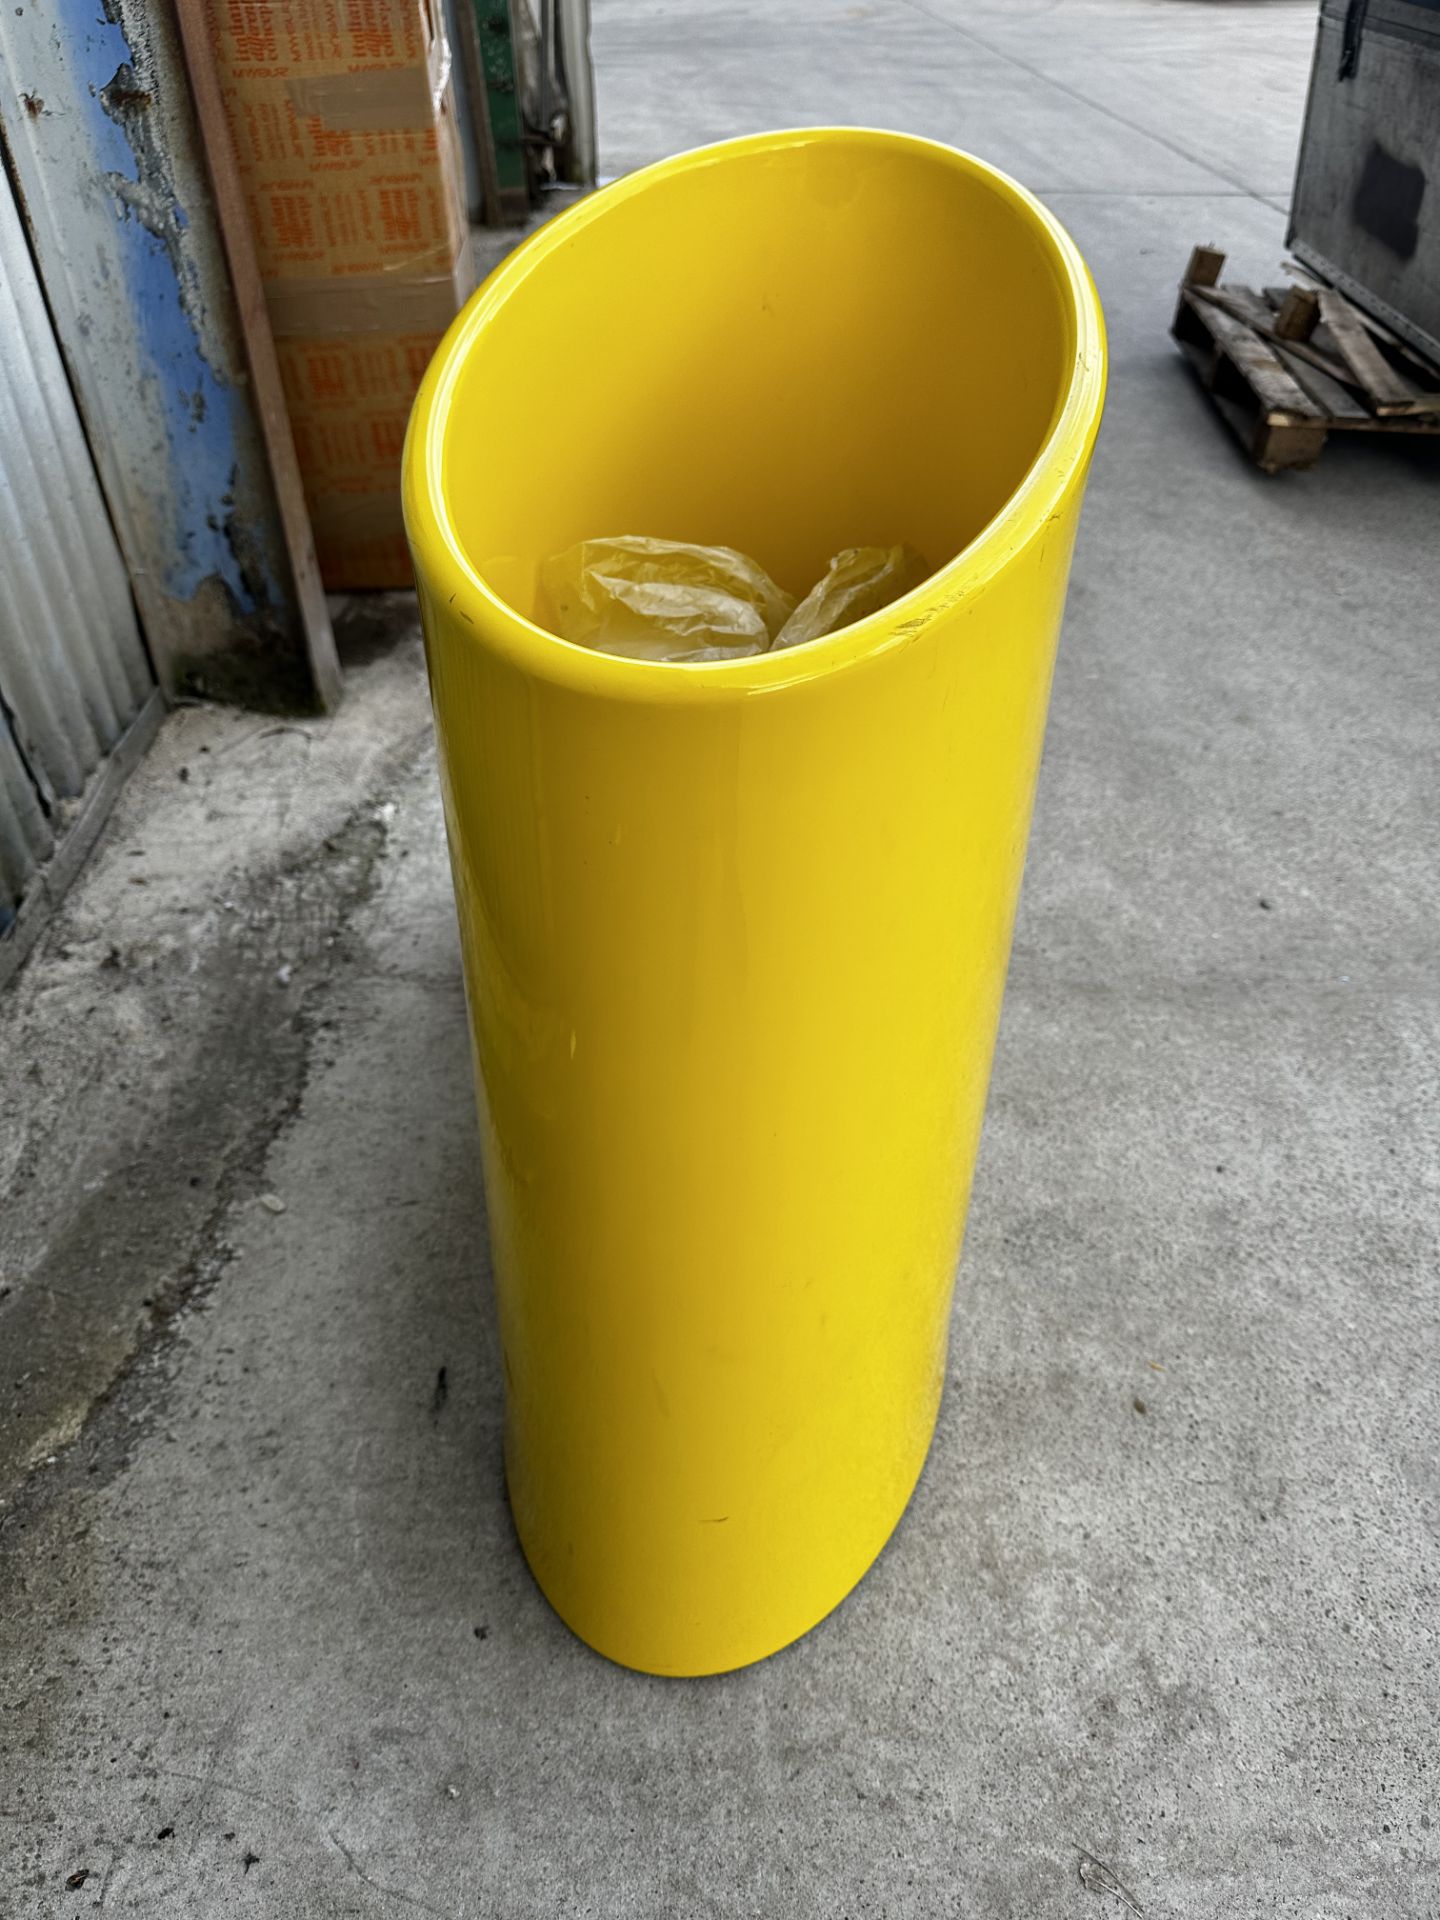 Tao L Flowerpot Glass Plastic Material Yellow - MyYour - Used - Approx. RRP £350 - Image 2 of 3